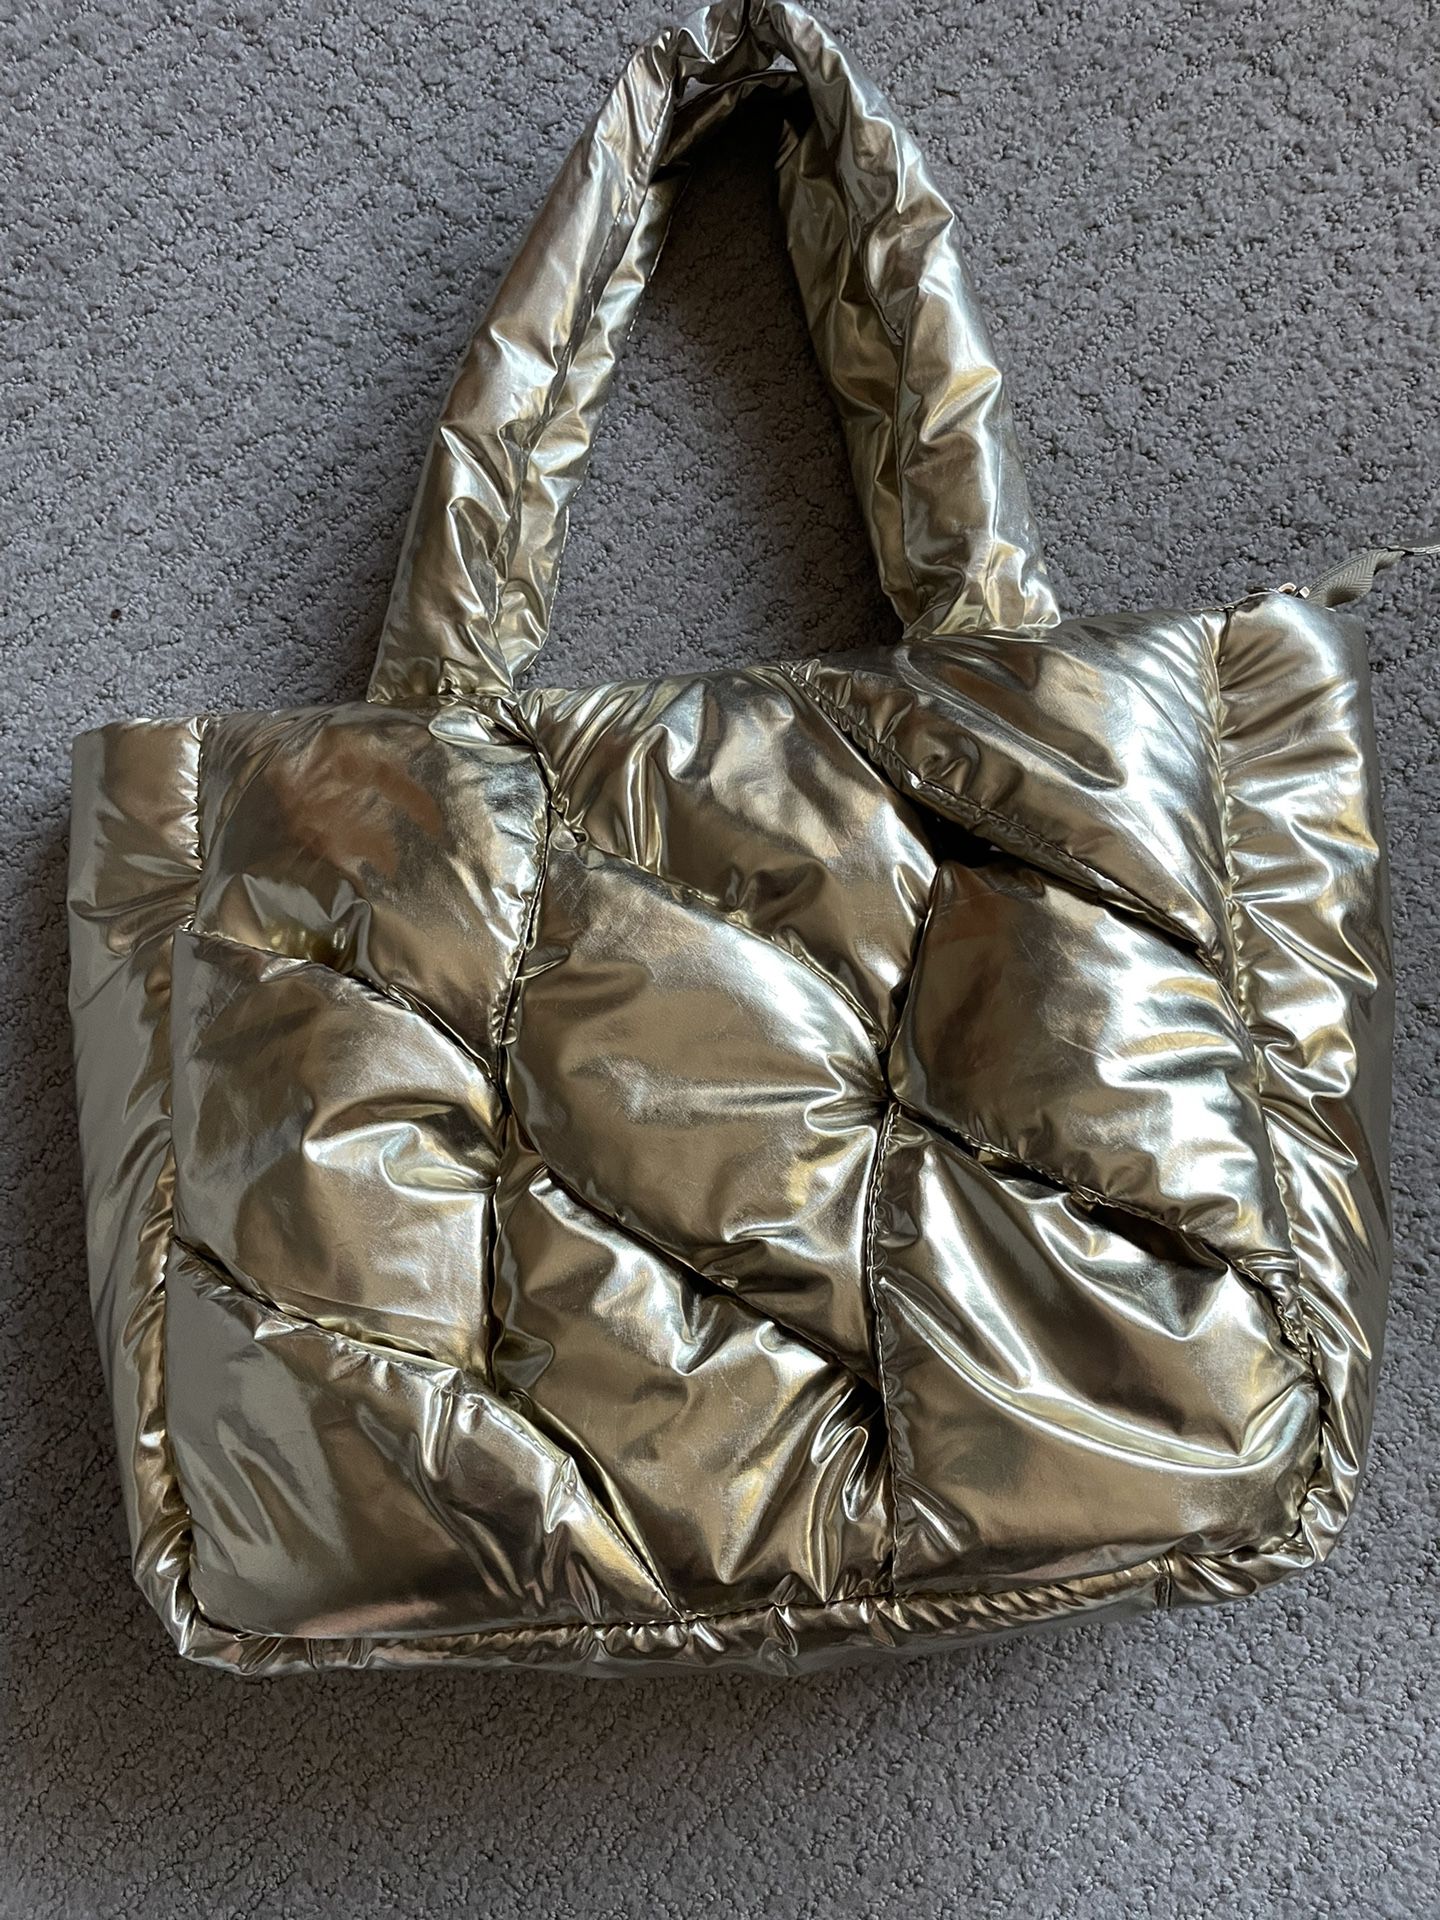 $45 New no tags Vince Camuto Gold Tote